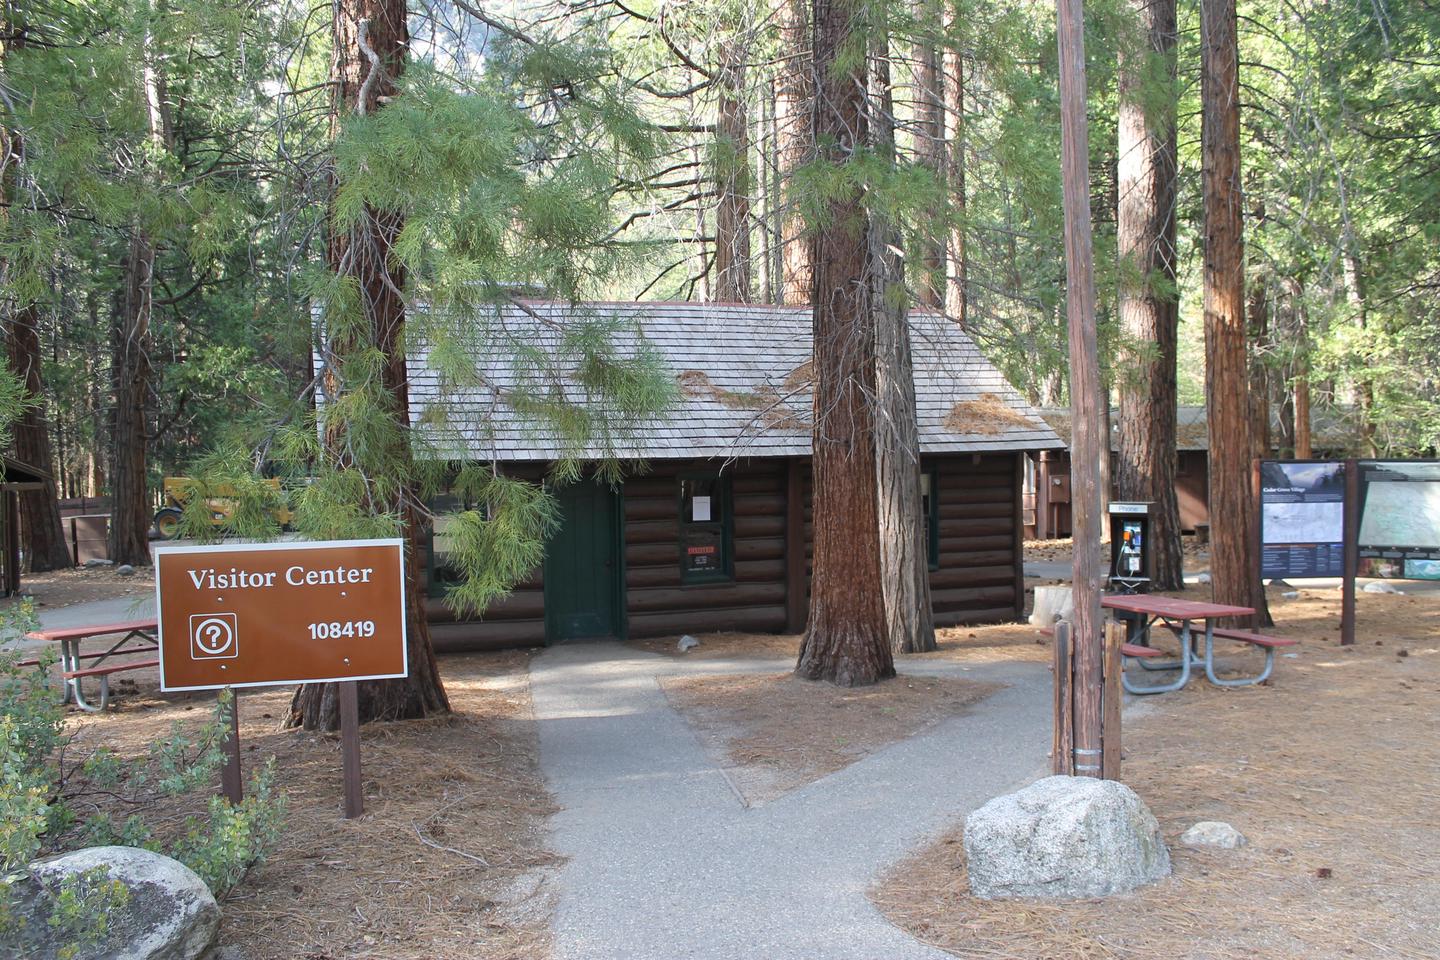 Cedar Grove Visitor CenterAt this quaint log cabin visitor center, you will find exhibits, books, and a ranger available to answer questions.